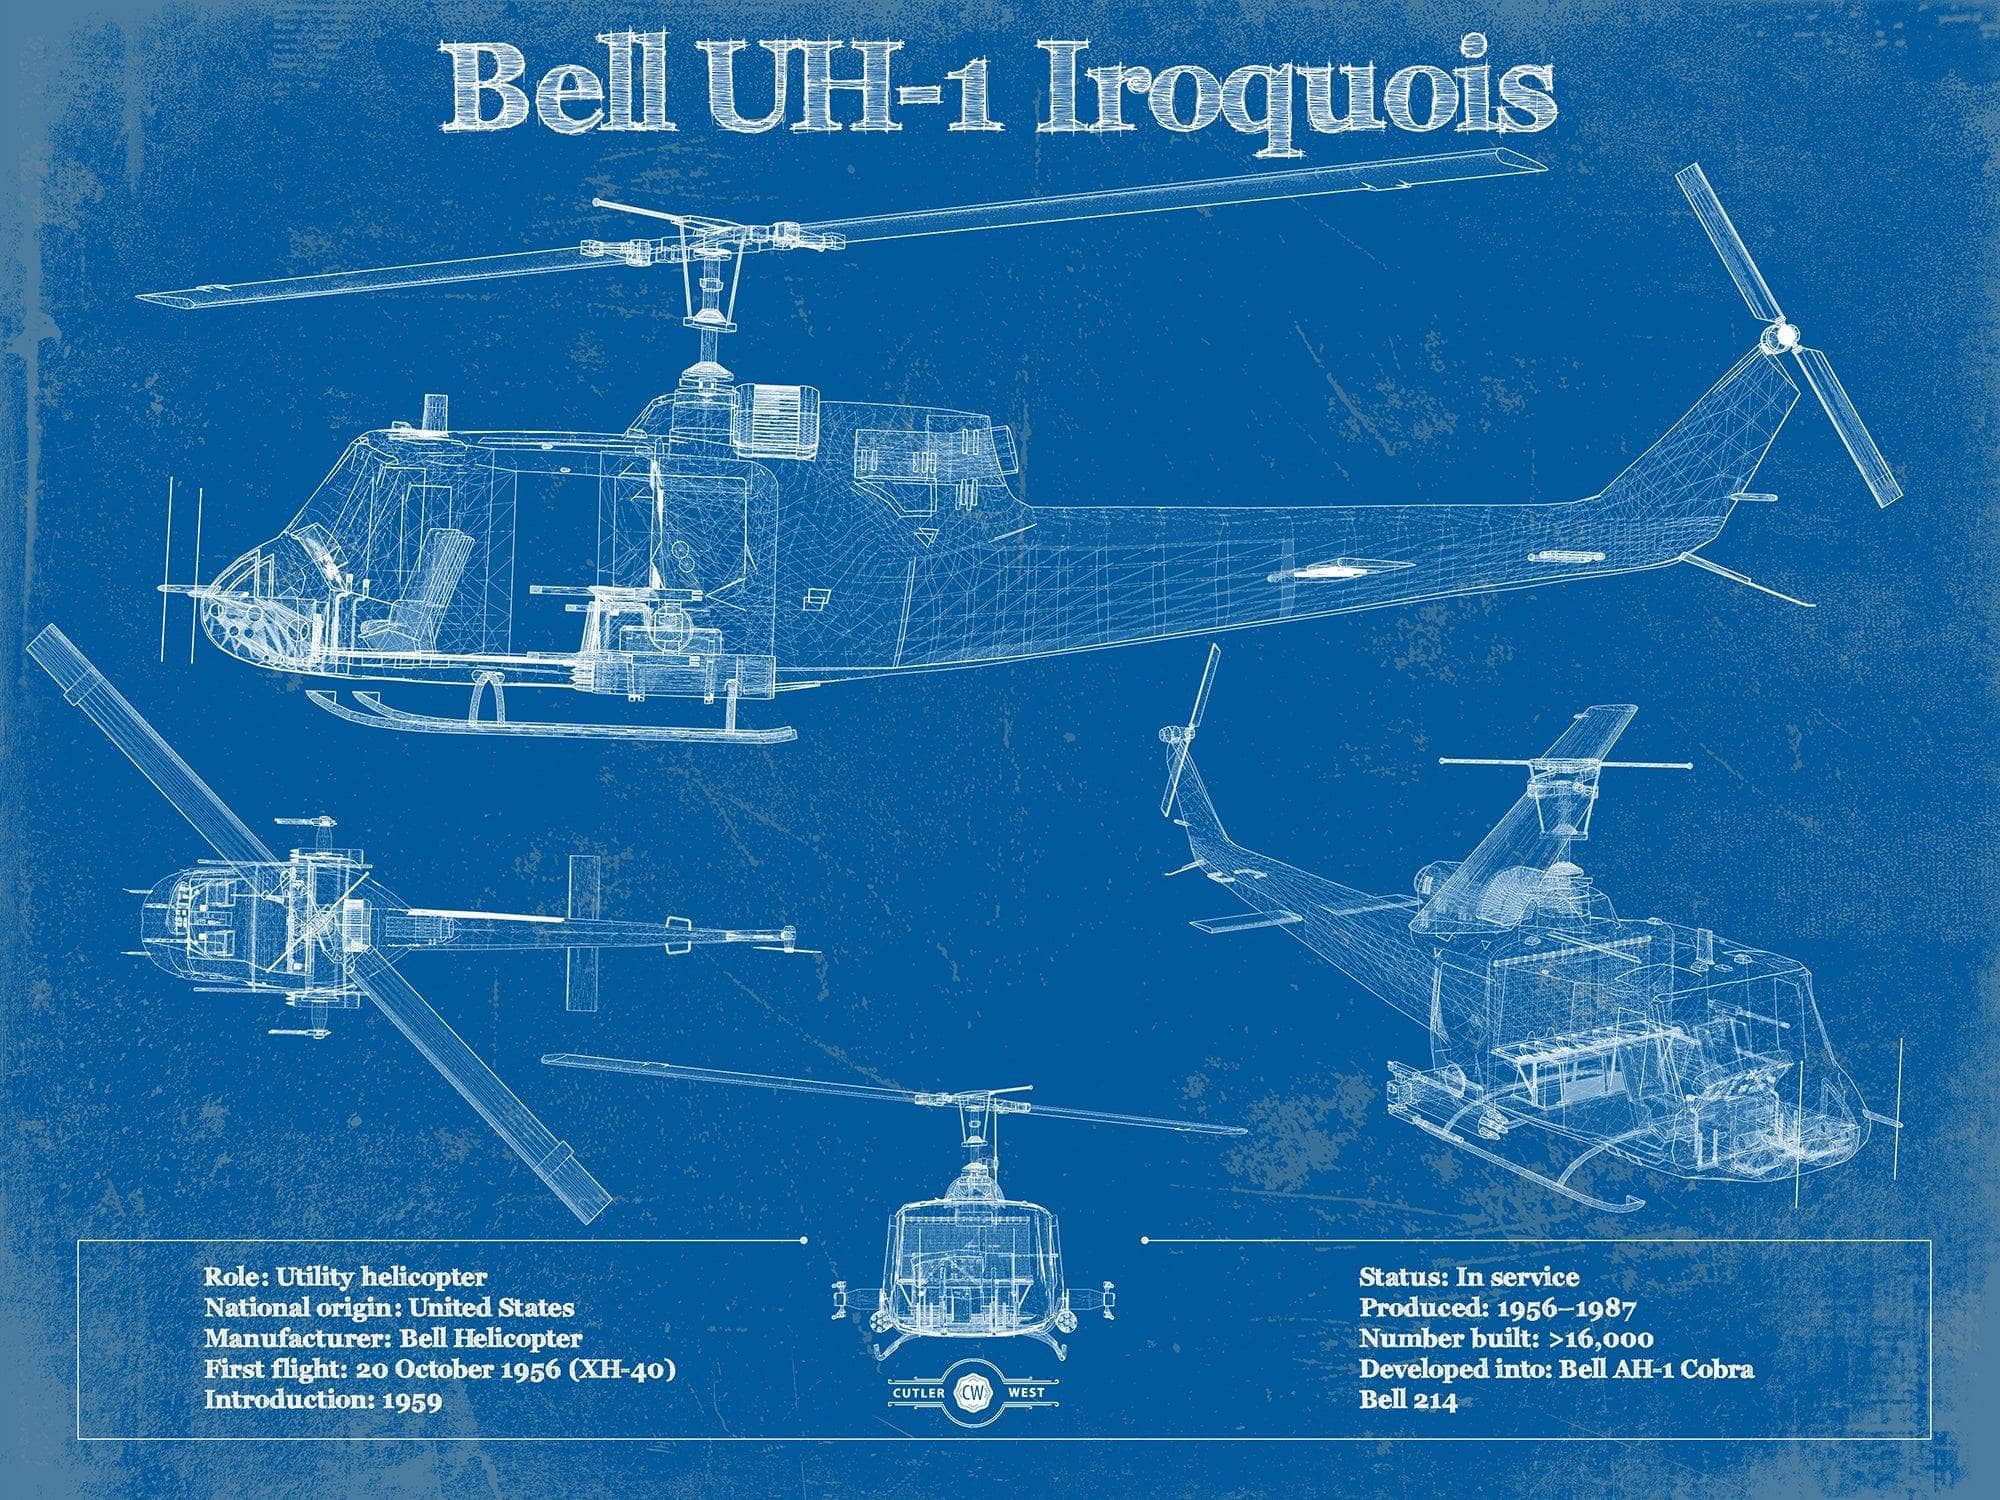 Cutler West Military Aircraft 14" x 11" / Unframed Bell UH-1 Iroquois (Huey) Vintage Blueprint Helicopter Print 833110167_35339